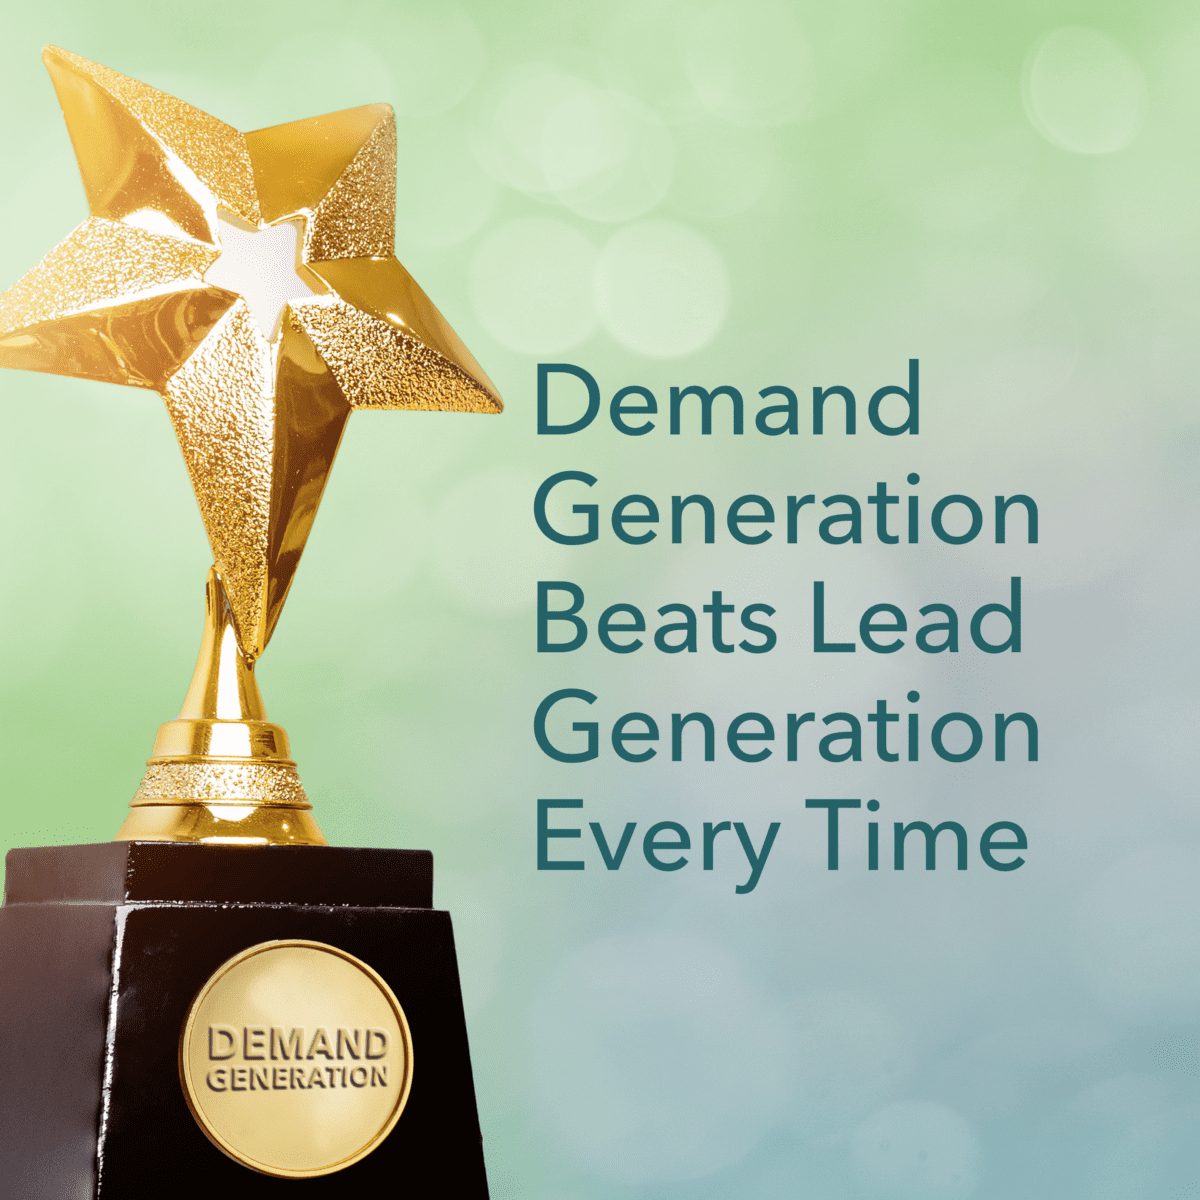 WHY YOU WON’T GET LEADS WITHOUT DEMAND GENERATION